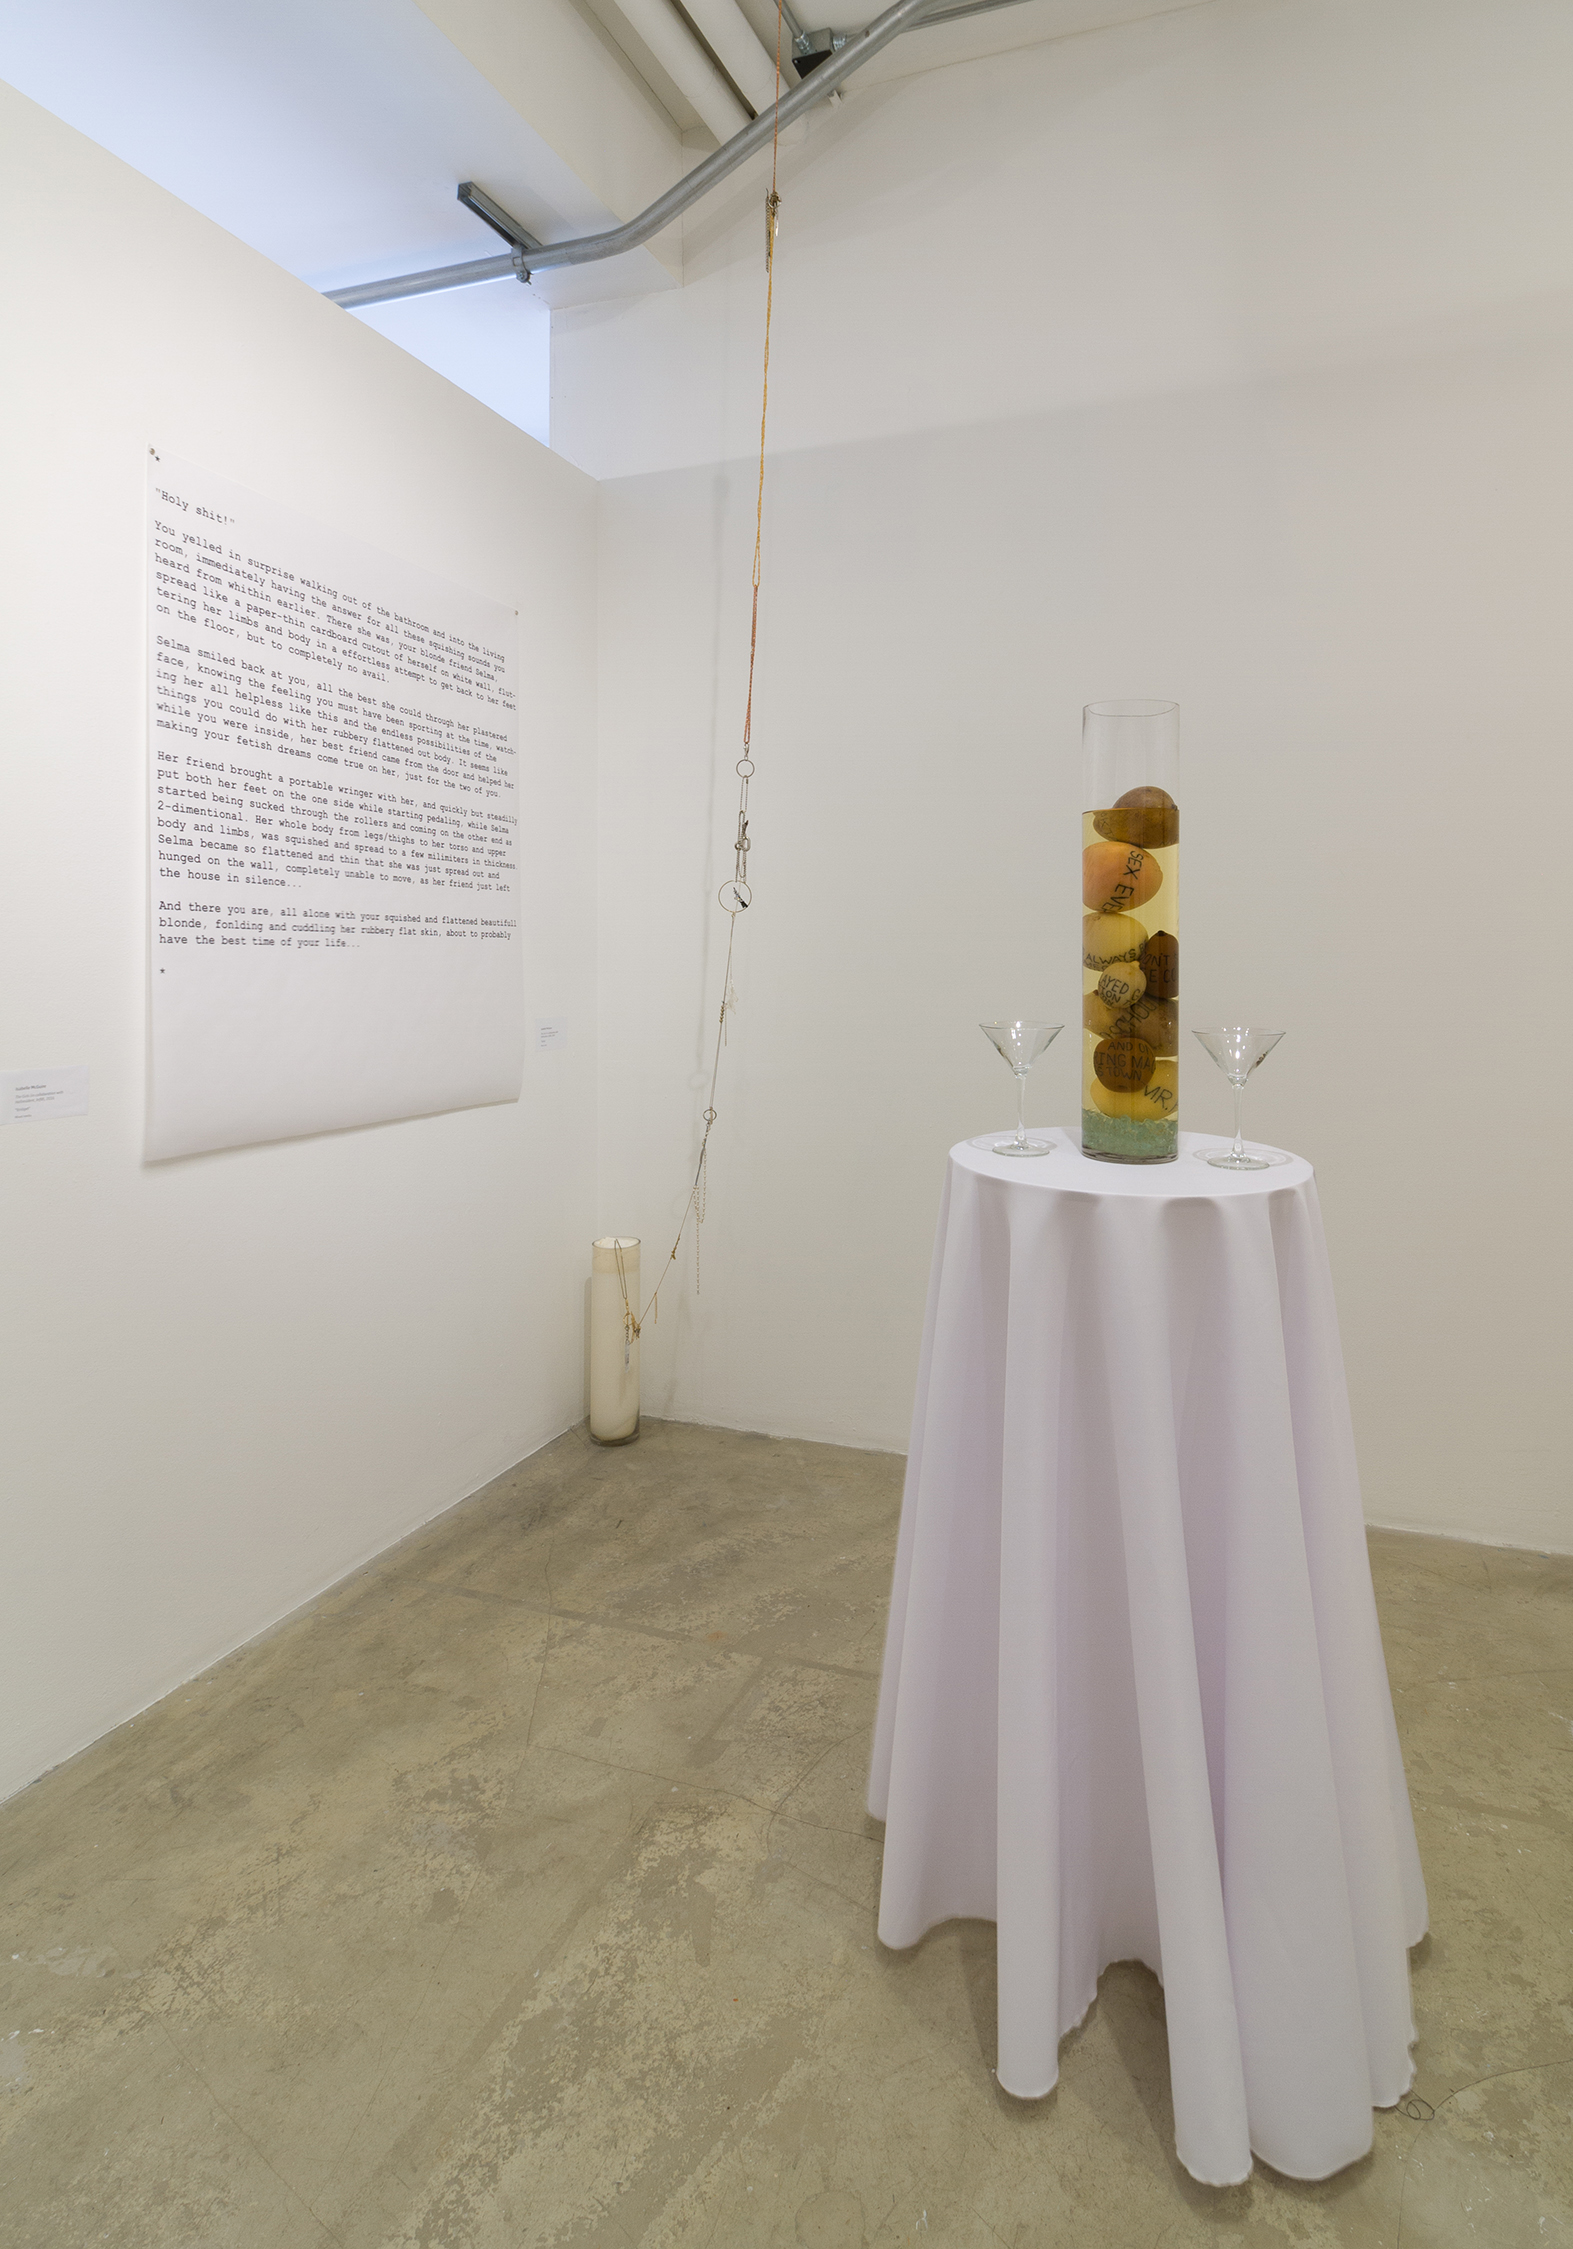 Installation view of one round table with fruit colums on them and a text print in a white wall gallery